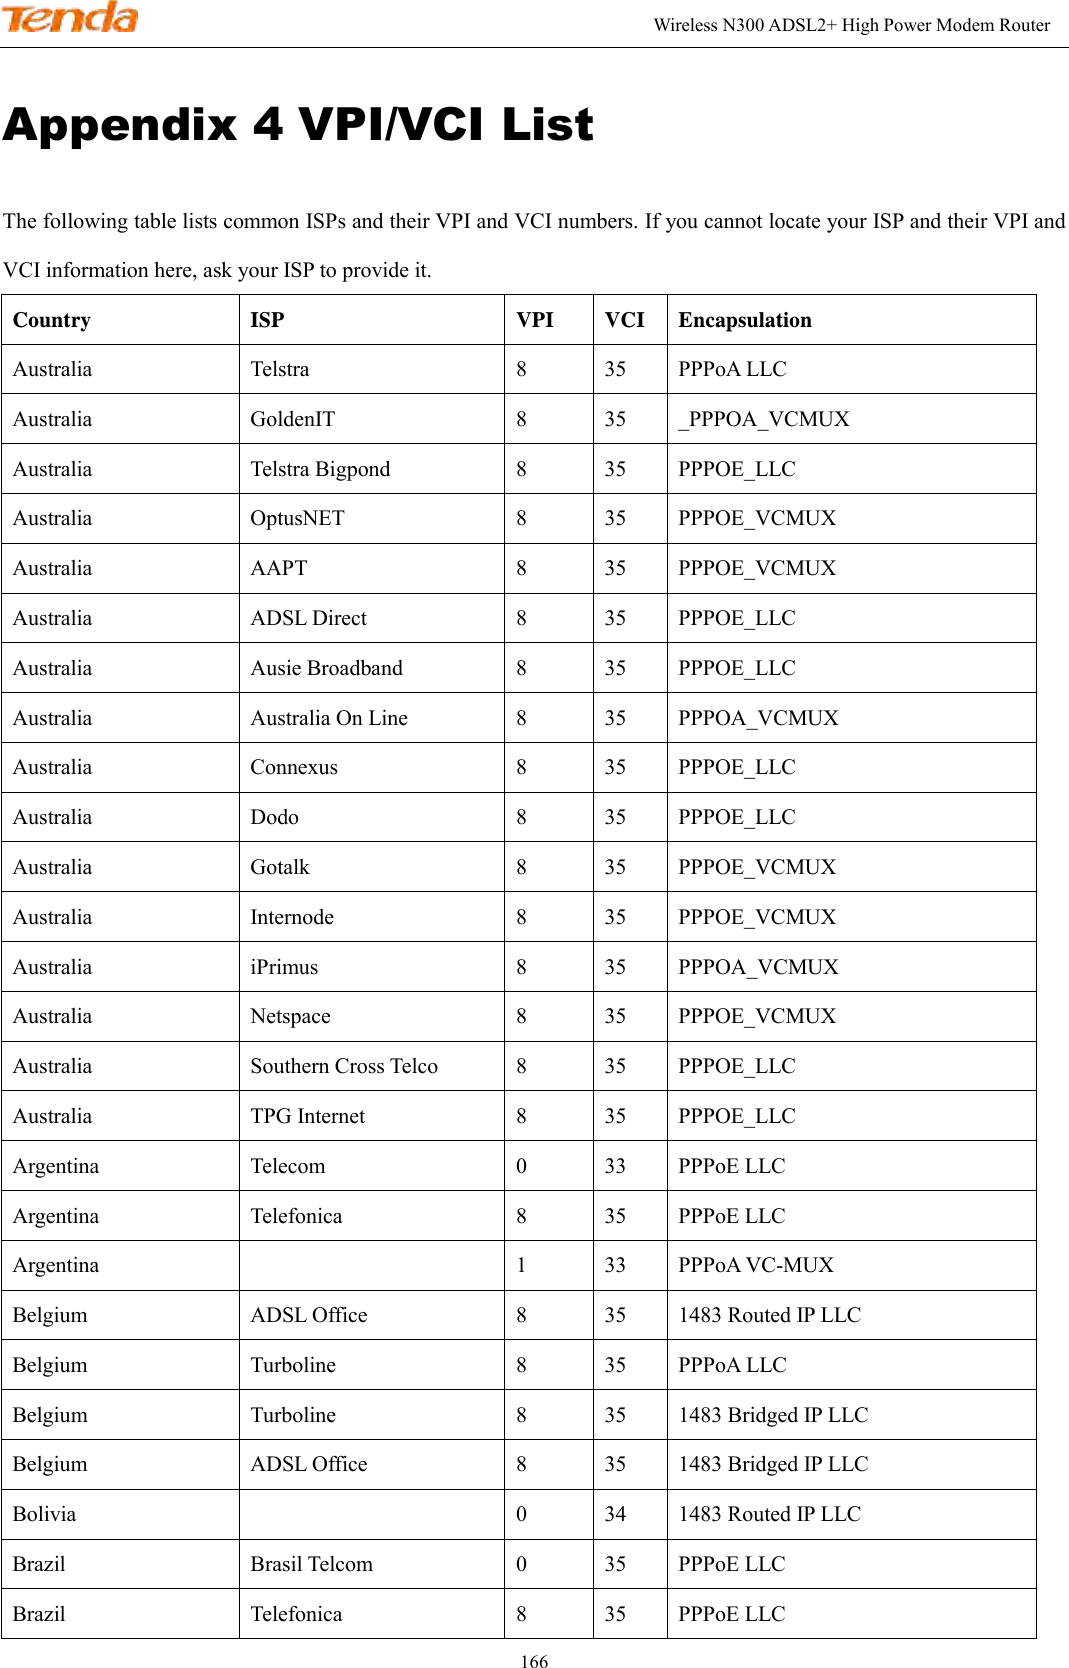                                                                                                               Wireless N300 ADSL2+ High Power Modem Router 166 Appendix 4 VPI/VCI List The following table lists common ISPs and their VPI and VCI numbers. If you cannot locate your ISP and their VPI and VCI information here, ask your ISP to provide it. Country ISP   VPI VCI Encapsulation Australia Telstra 8 35 PPPoA LLC Australia   GoldenIT 8 35 _PPPOA_VCMUX Australia   Telstra Bigpond 8 35 PPPOE_LLC Australia OptusNET 8 35 PPPOE_VCMUX Australia   AAPT 8 35 PPPOE_VCMUX Australia   ADSL Direct 8 35 PPPOE_LLC Australia   Ausie Broadband 8 35 PPPOE_LLC Australia   Australia On Line 8 35 PPPOA_VCMUX Australia   Connexus 8 35 PPPOE_LLC Australia   Dodo 8 35 PPPOE_LLC Australia Gotalk 8 35 PPPOE_VCMUX Australia   Internode 8 35 PPPOE_VCMUX Australia   iPrimus 8 35 PPPOA_VCMUX Australia   Netspace 8 35 PPPOE_VCMUX Australia   Southern Cross Telco 8 35 PPPOE_LLC Australia   TPG Internet 8 35 PPPOE_LLC Argentina Telecom 0 33 PPPoE LLC Argentina   Telefonica 8 35 PPPoE LLC Argentina   1 33 PPPoA VC-MUX Belgium ADSL Office 8 35 1483 Routed IP LLC Belgium Turboline 8 35 PPPoA LLC Belgium   Turboline 8 35 1483 Bridged IP LLC Belgium   ADSL Office 8 35 1483 Bridged IP LLC Bolivia   0 34 1483 Routed IP LLC Brazil   Brasil Telcom 0 35 PPPoE LLC Brazil   Telefonica 8 35 PPPoE LLC 